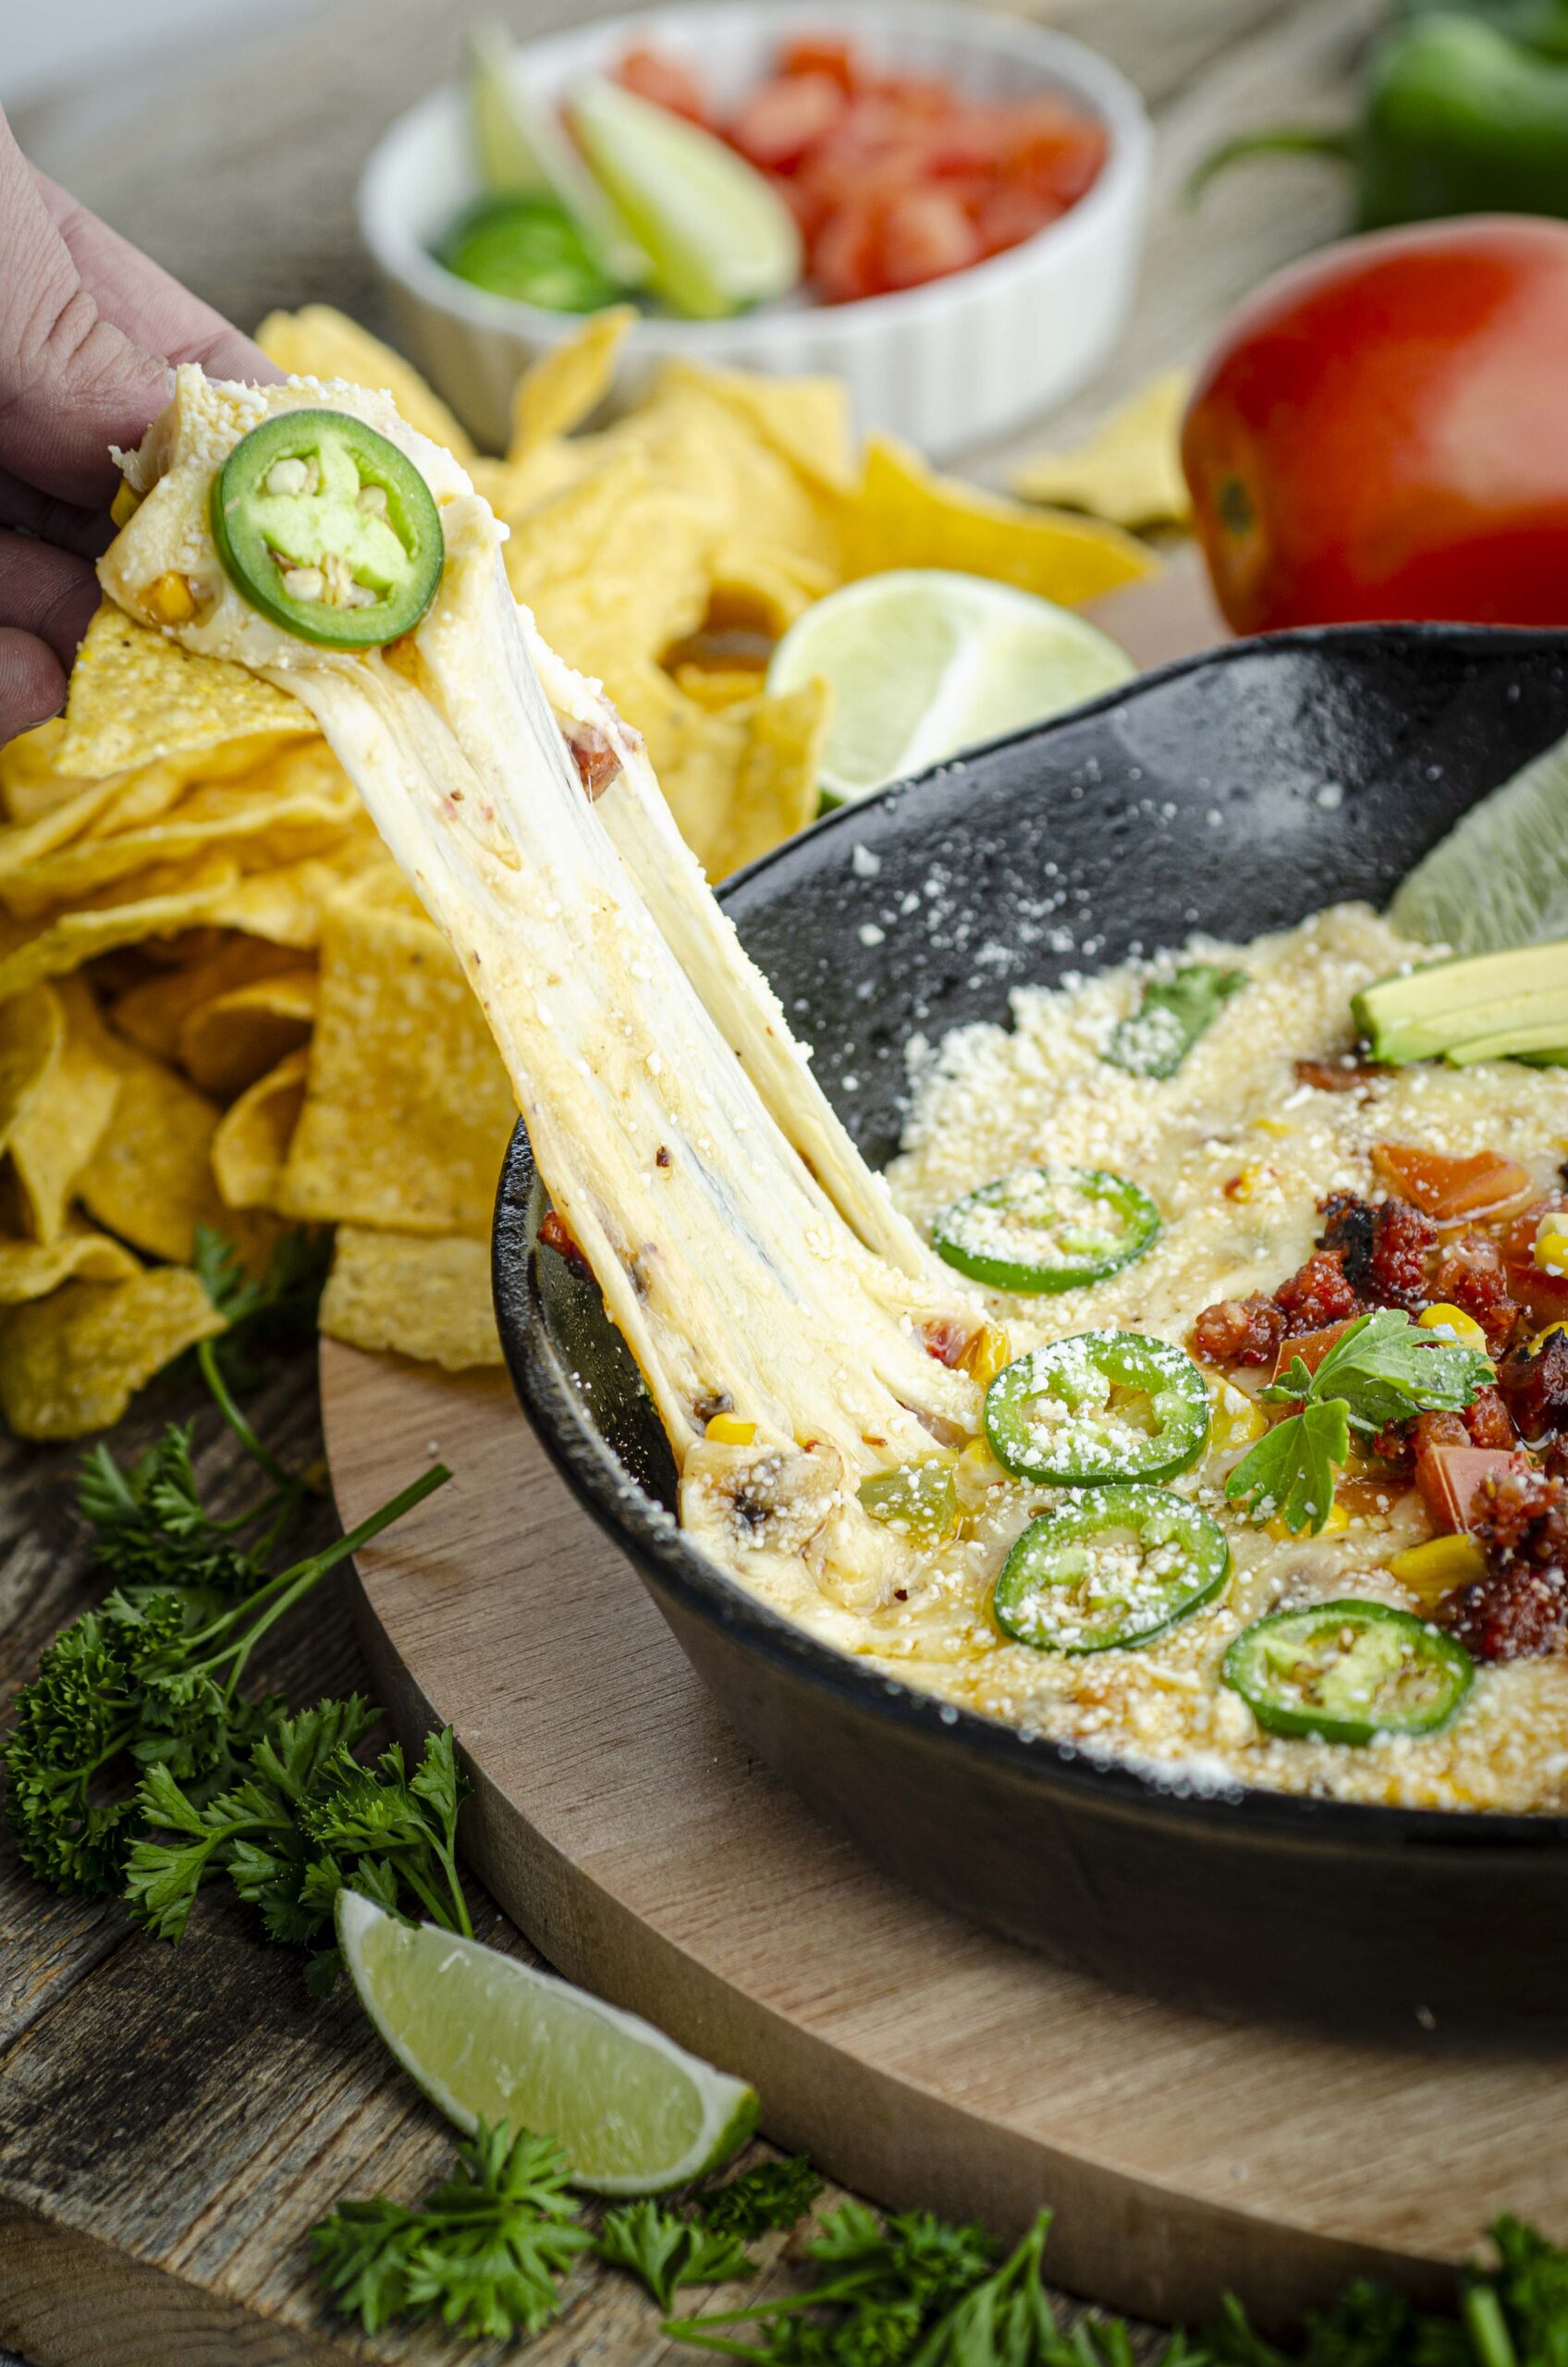 The Best Queso Fundido Dip cooked in Cast Iron